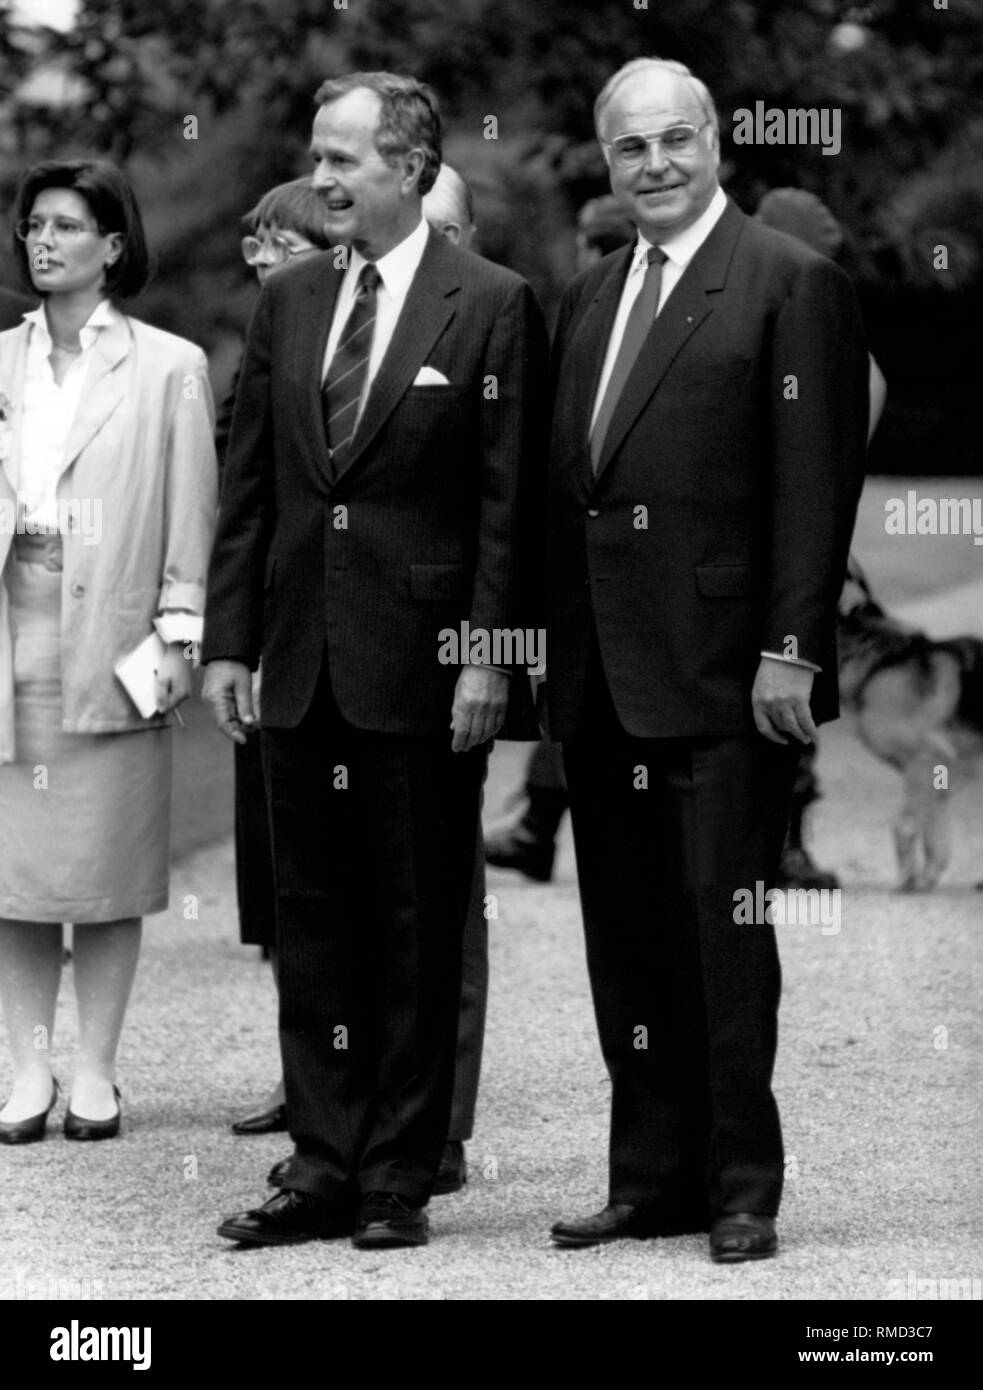 George W. Bush in Germany: On the left, the American President George H. W. Bush, on the right, Federal Chancellor Helmut Kohl. Stock Photo